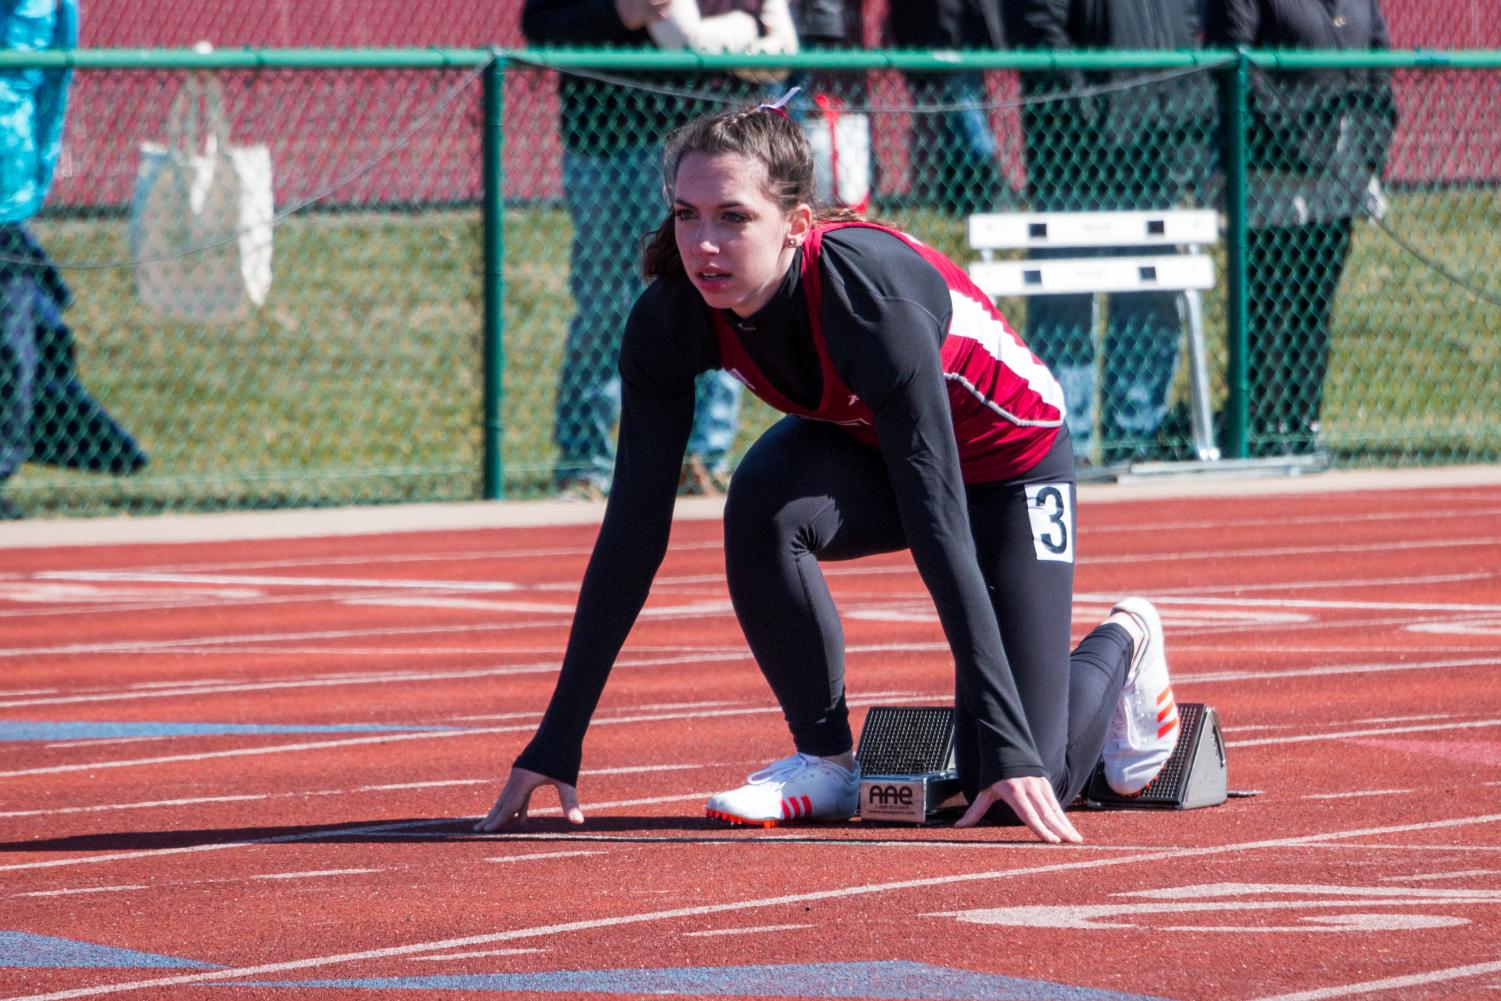 UMass track has solid showing at John Thomas Terrier Classic